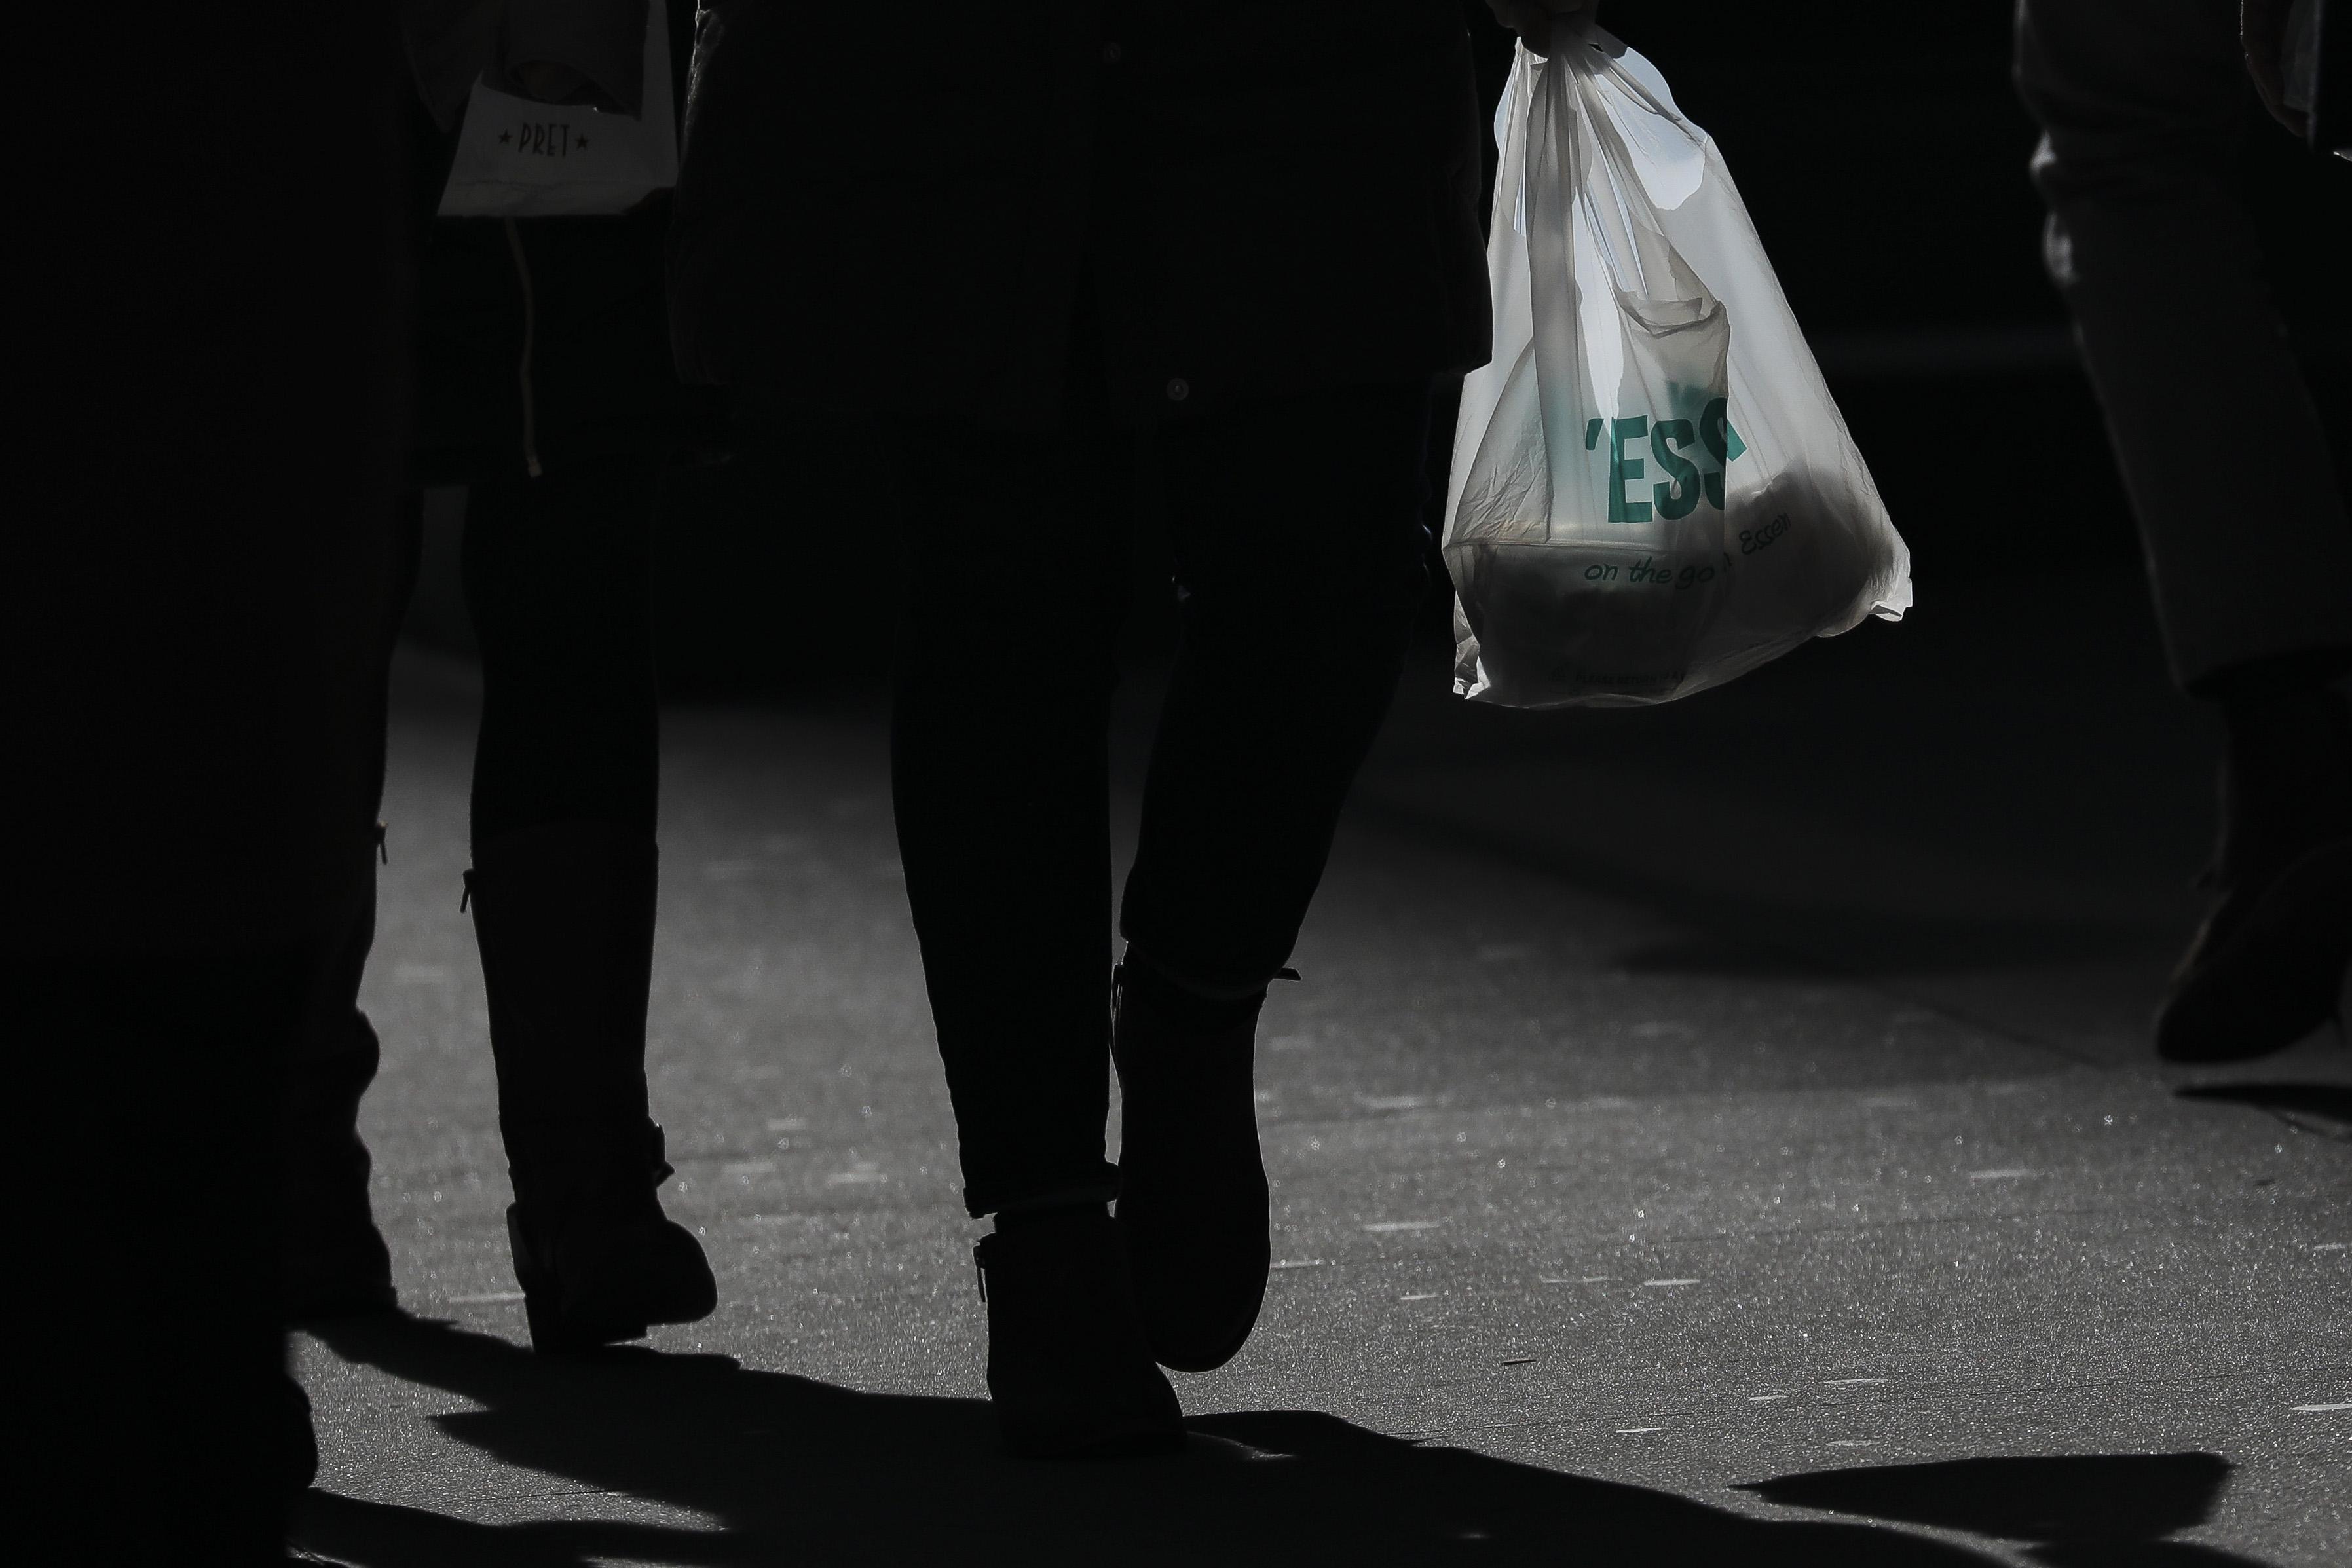 A person carries a plastic bag during the lunch hour in Lower Manhattan, January 15, 2019 in New York City. 